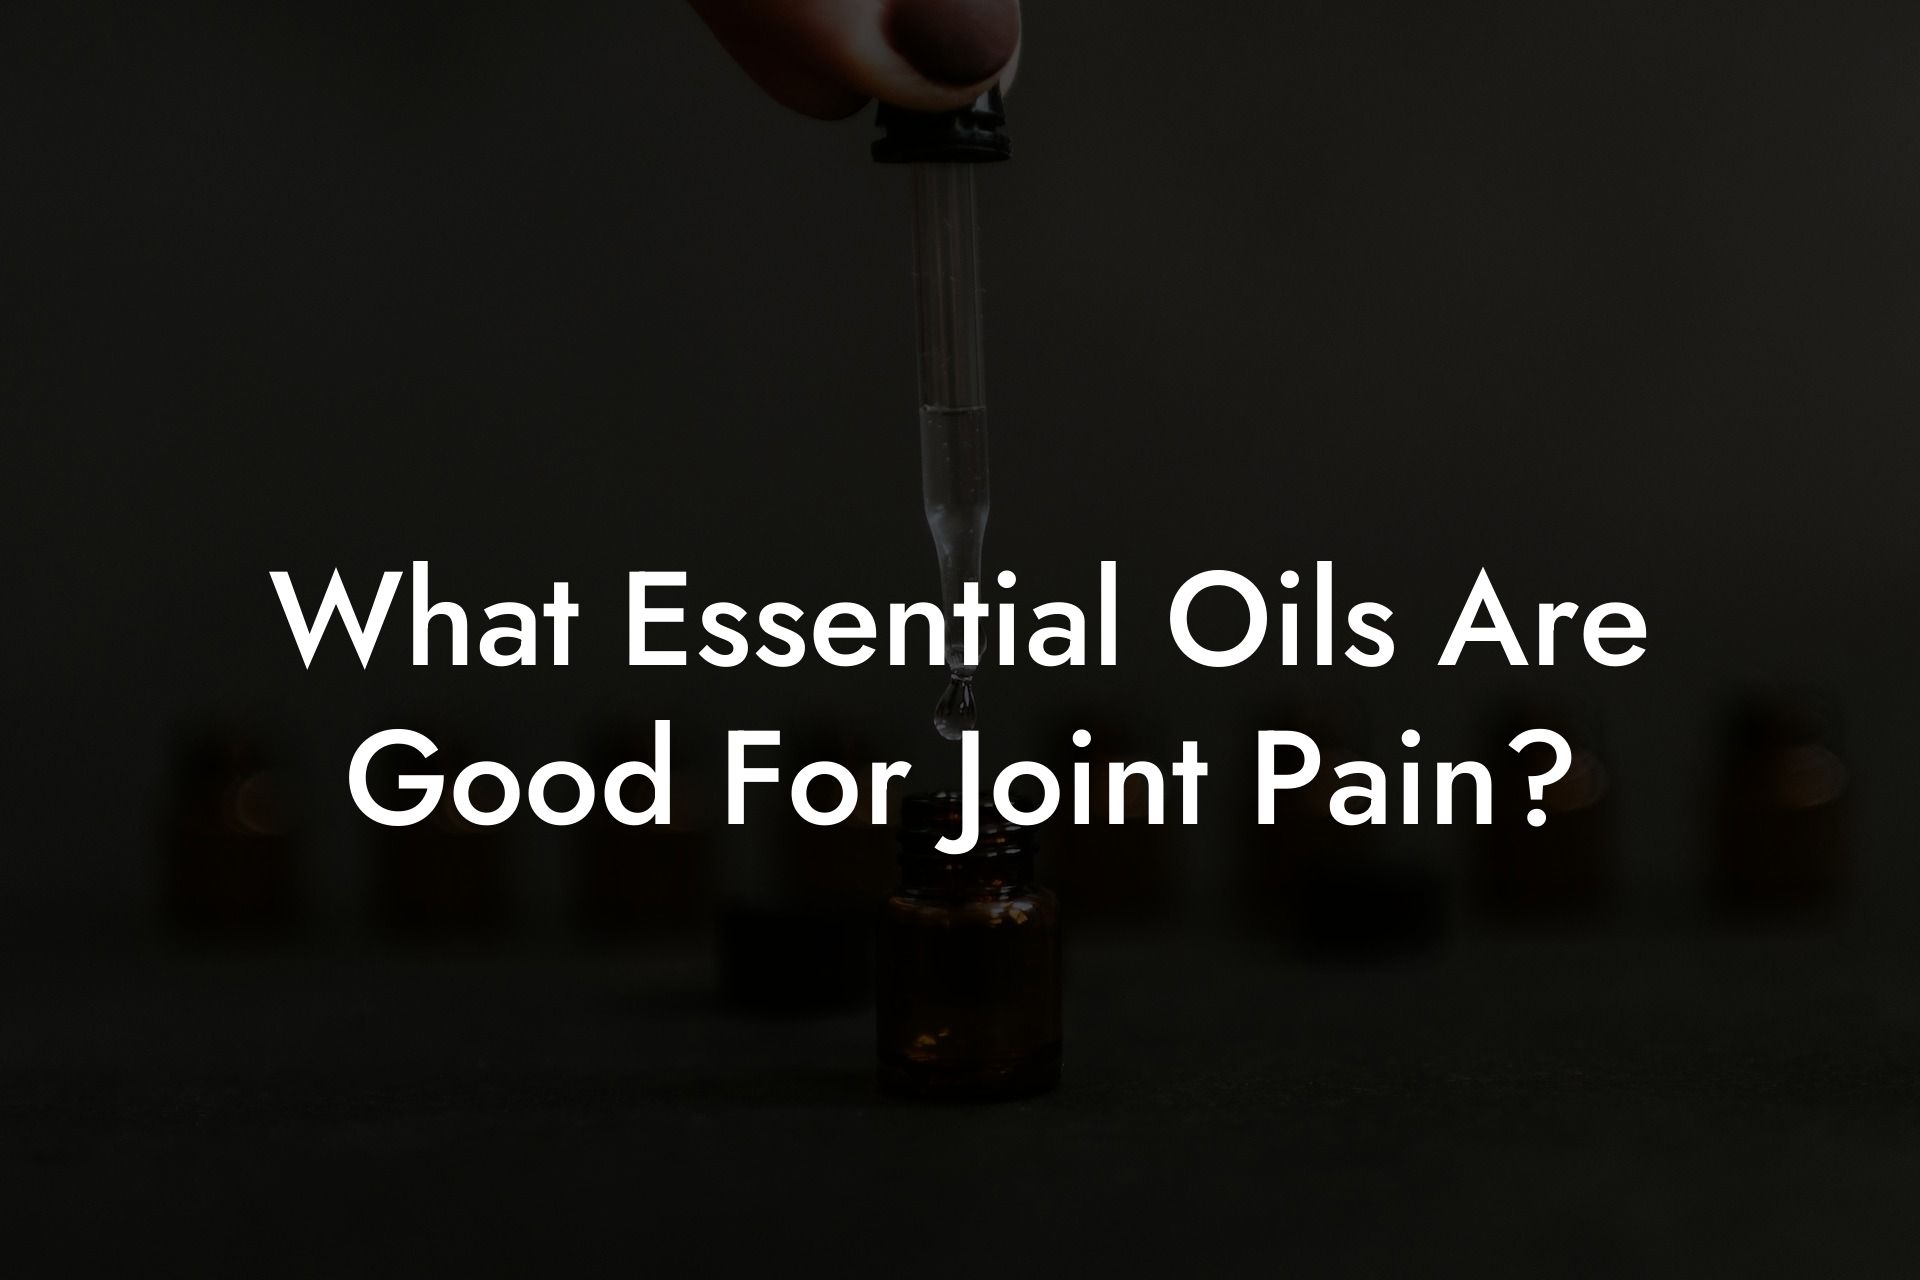 What Essential Oils Are Good For Joint Pain